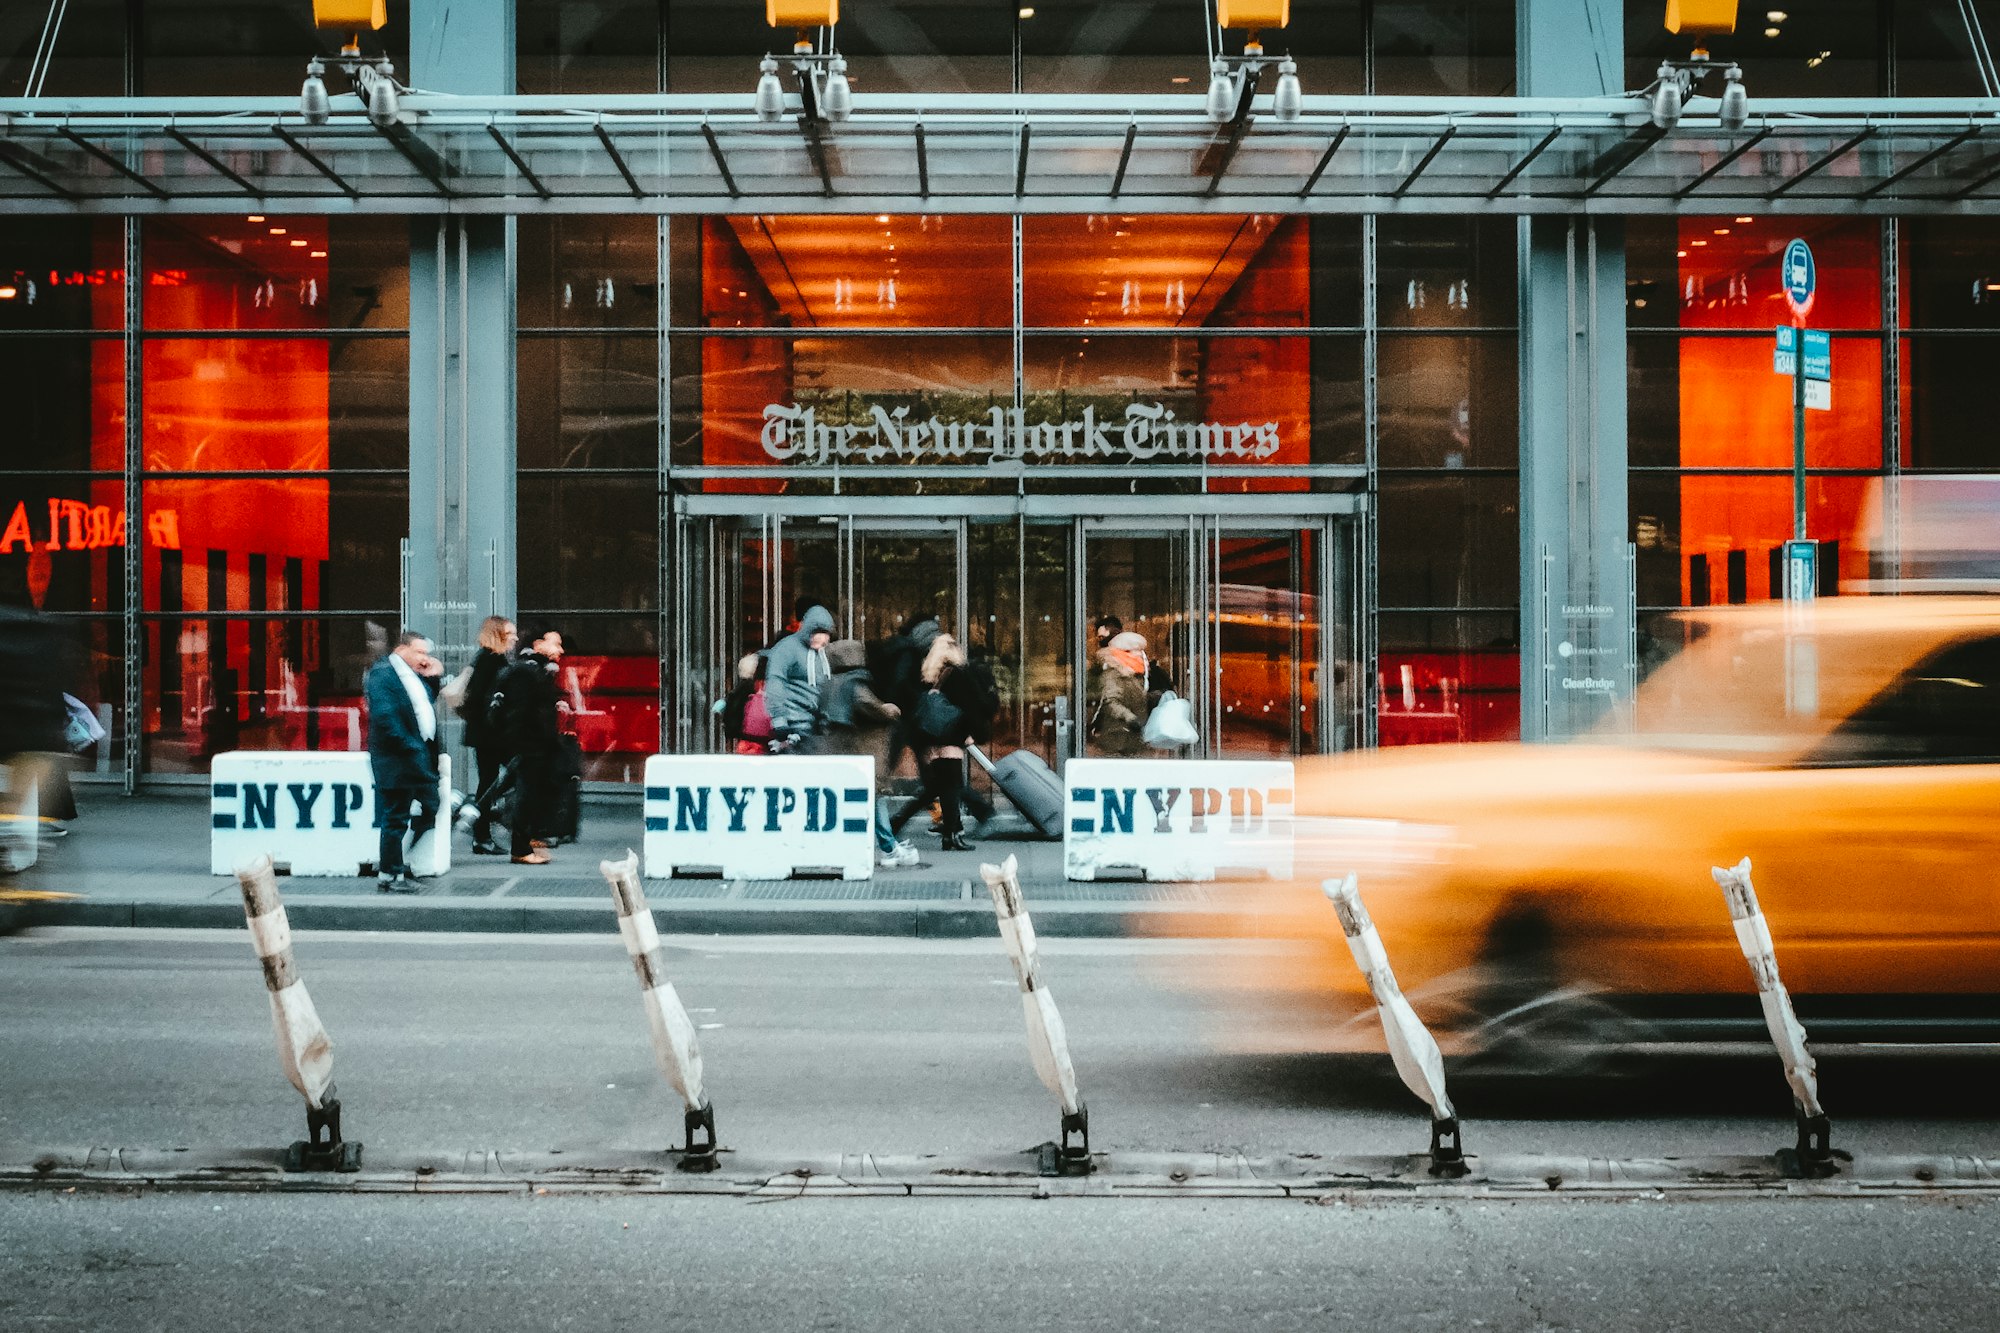 The iconic New York Times Building